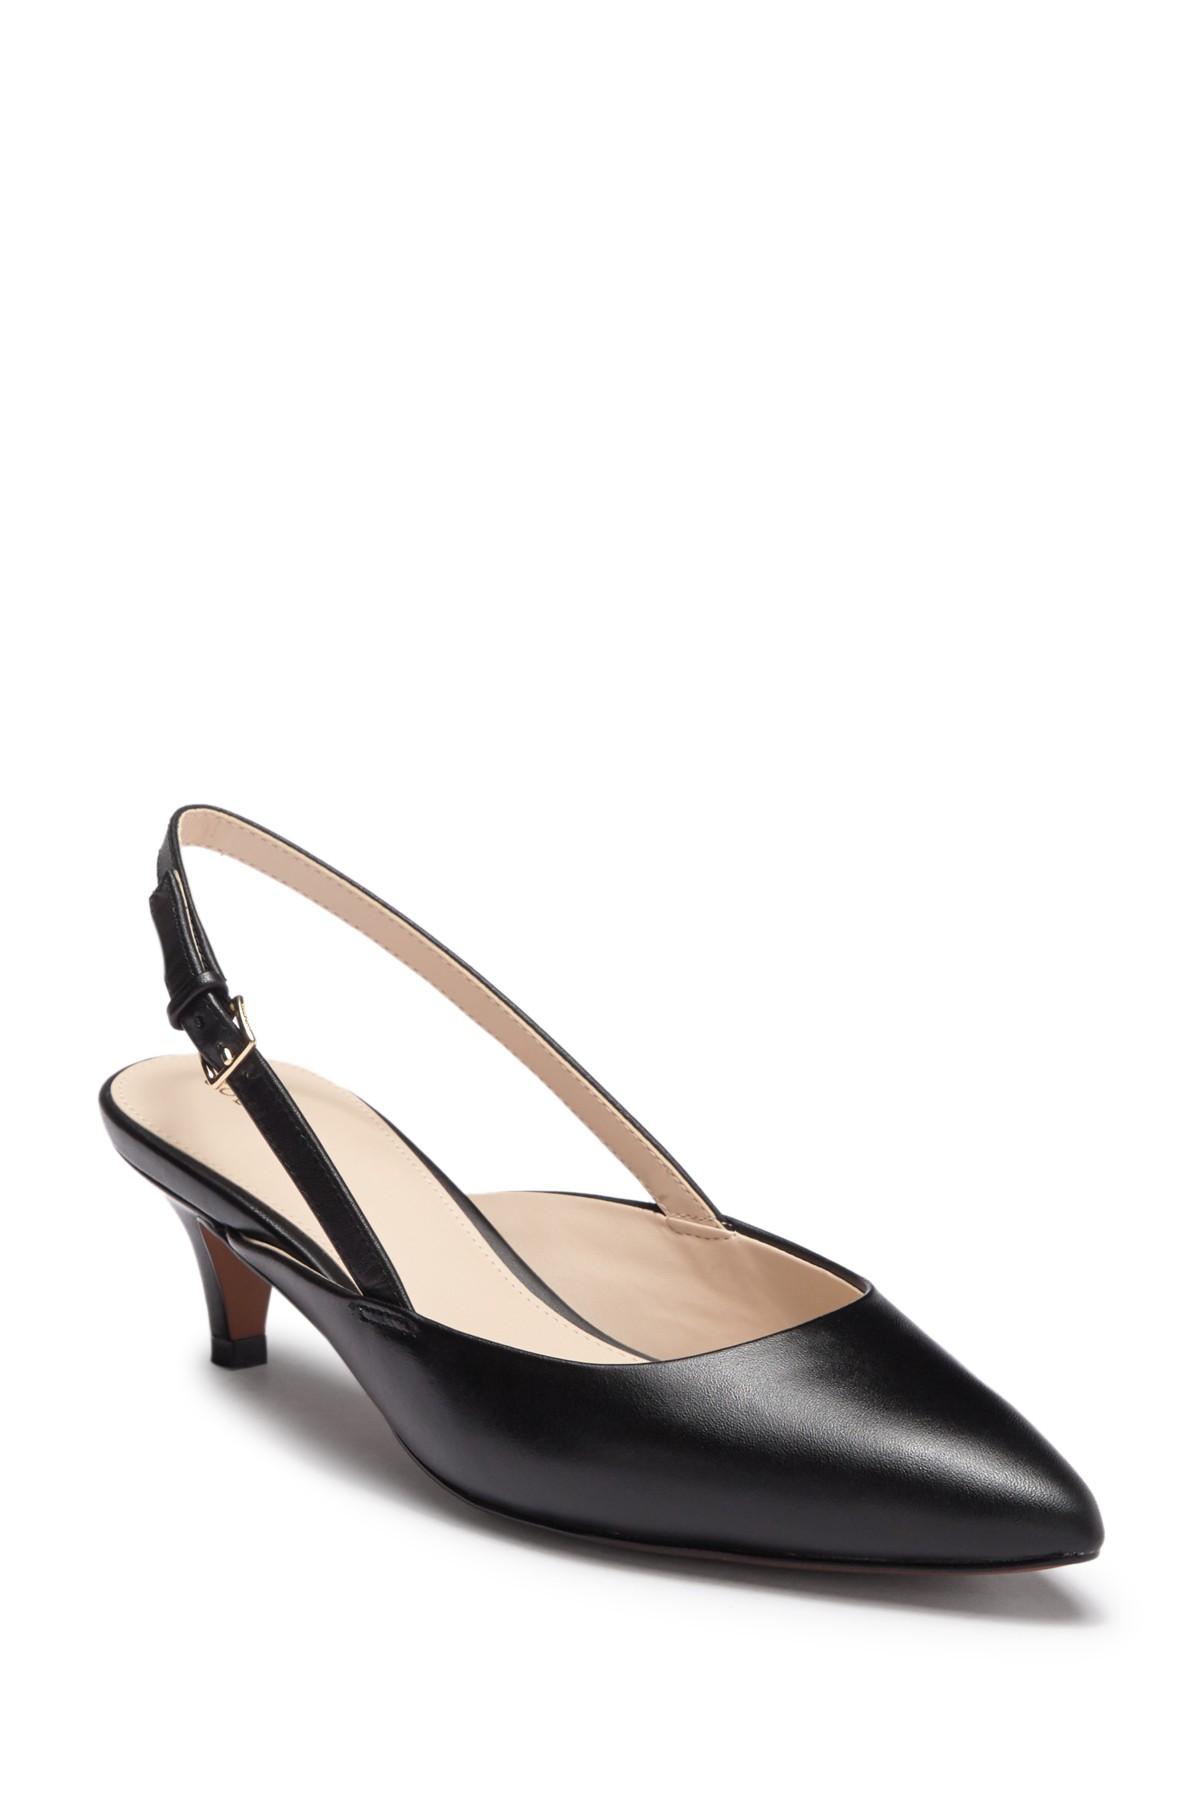 Cole Haan Leather Harlow Sling Back 